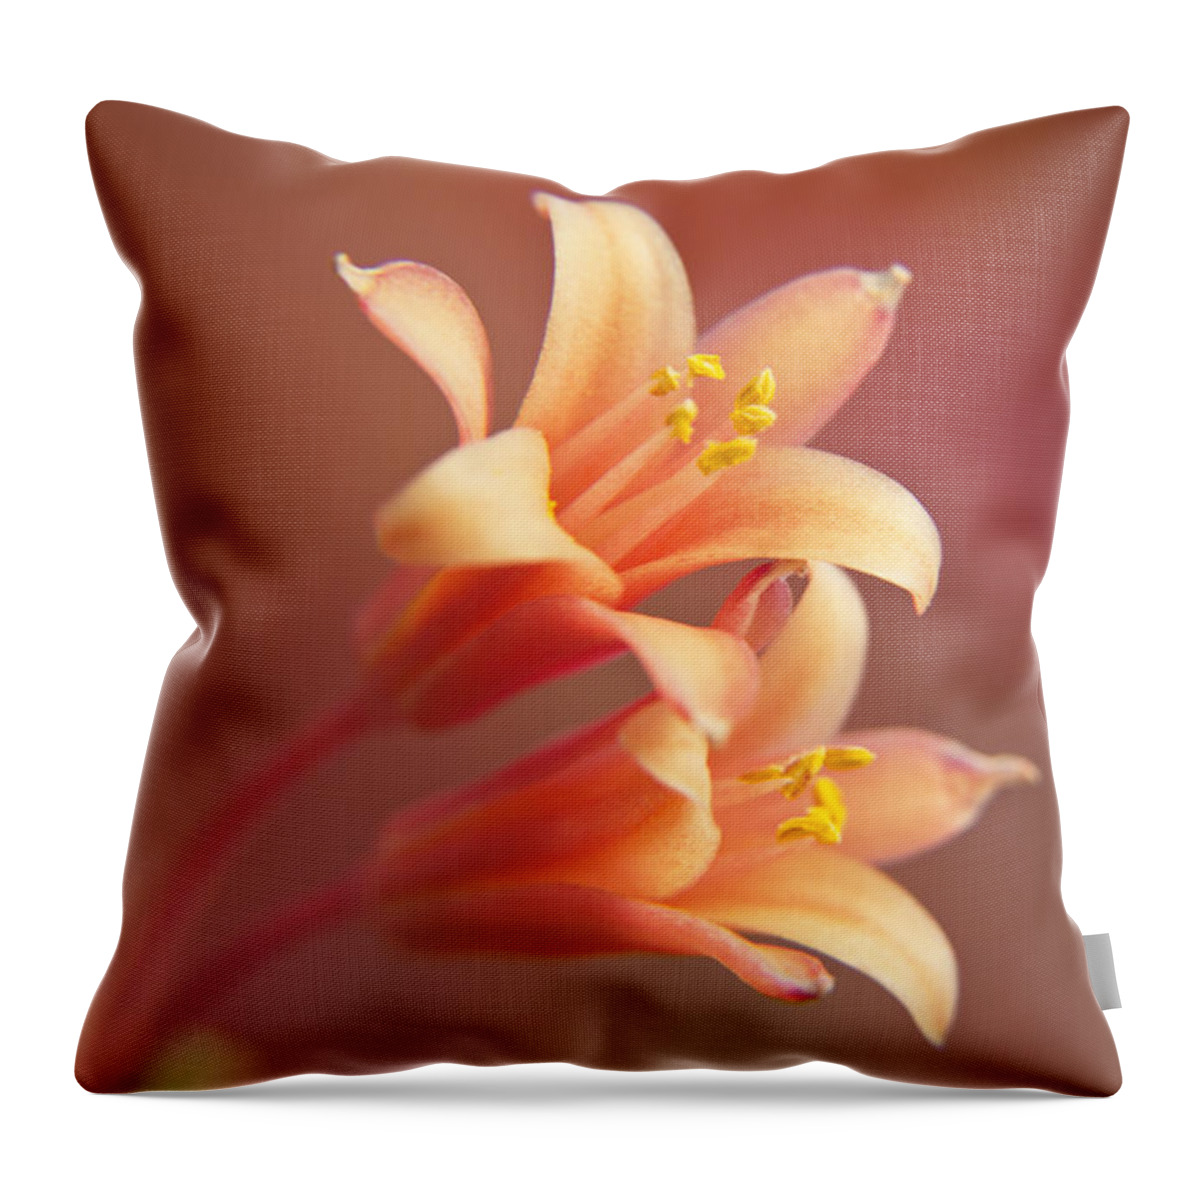 Wall Art Throw Pillow featuring the photograph Twin Yucca Flowers by Kelly Holm